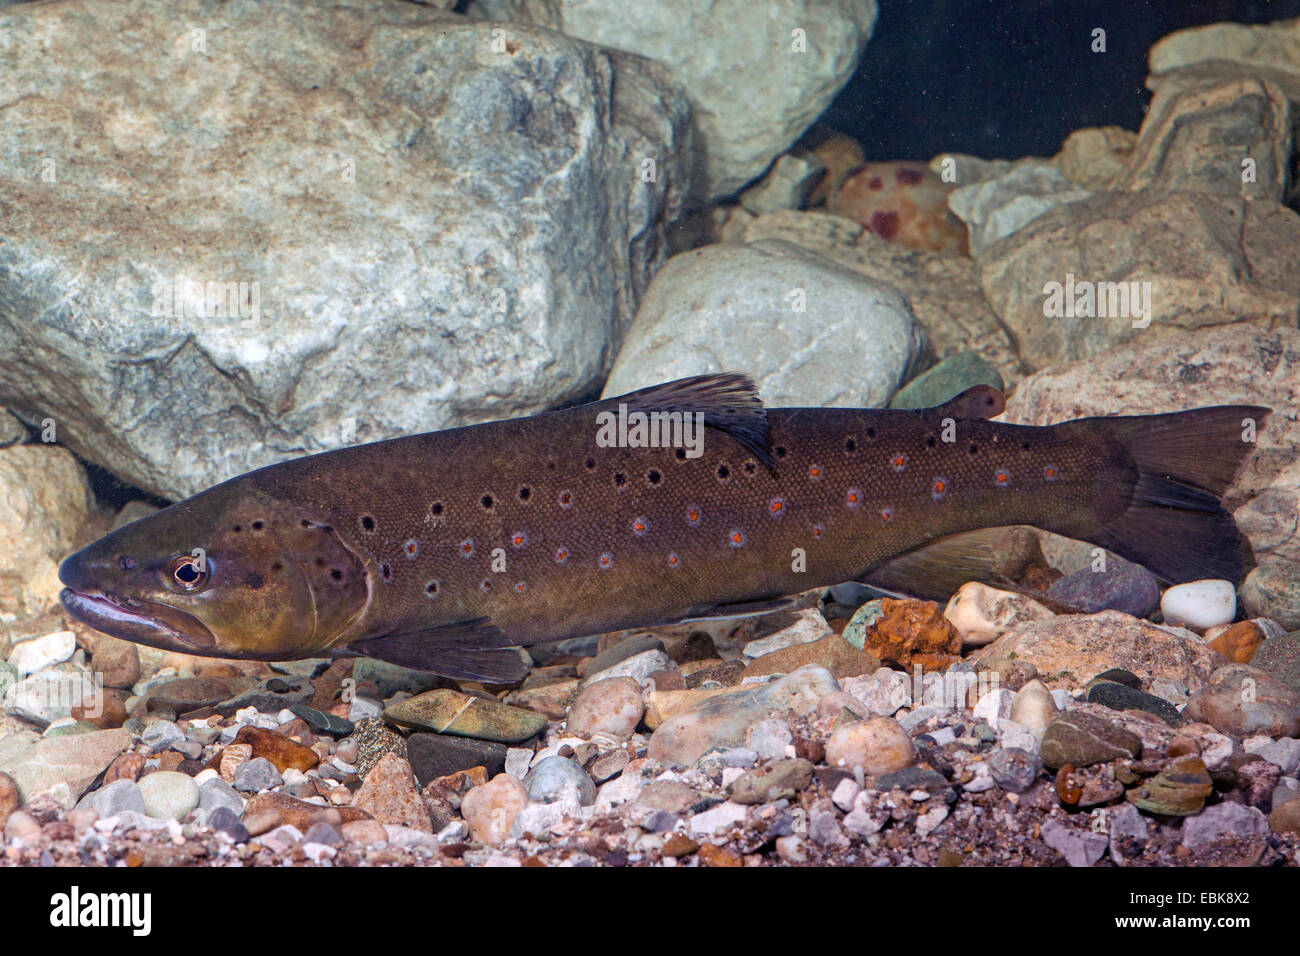 brown trout, river trout, brook trout (Salmo trutta fario), milkner over water ground covered with limestones, Germany Stock Photo